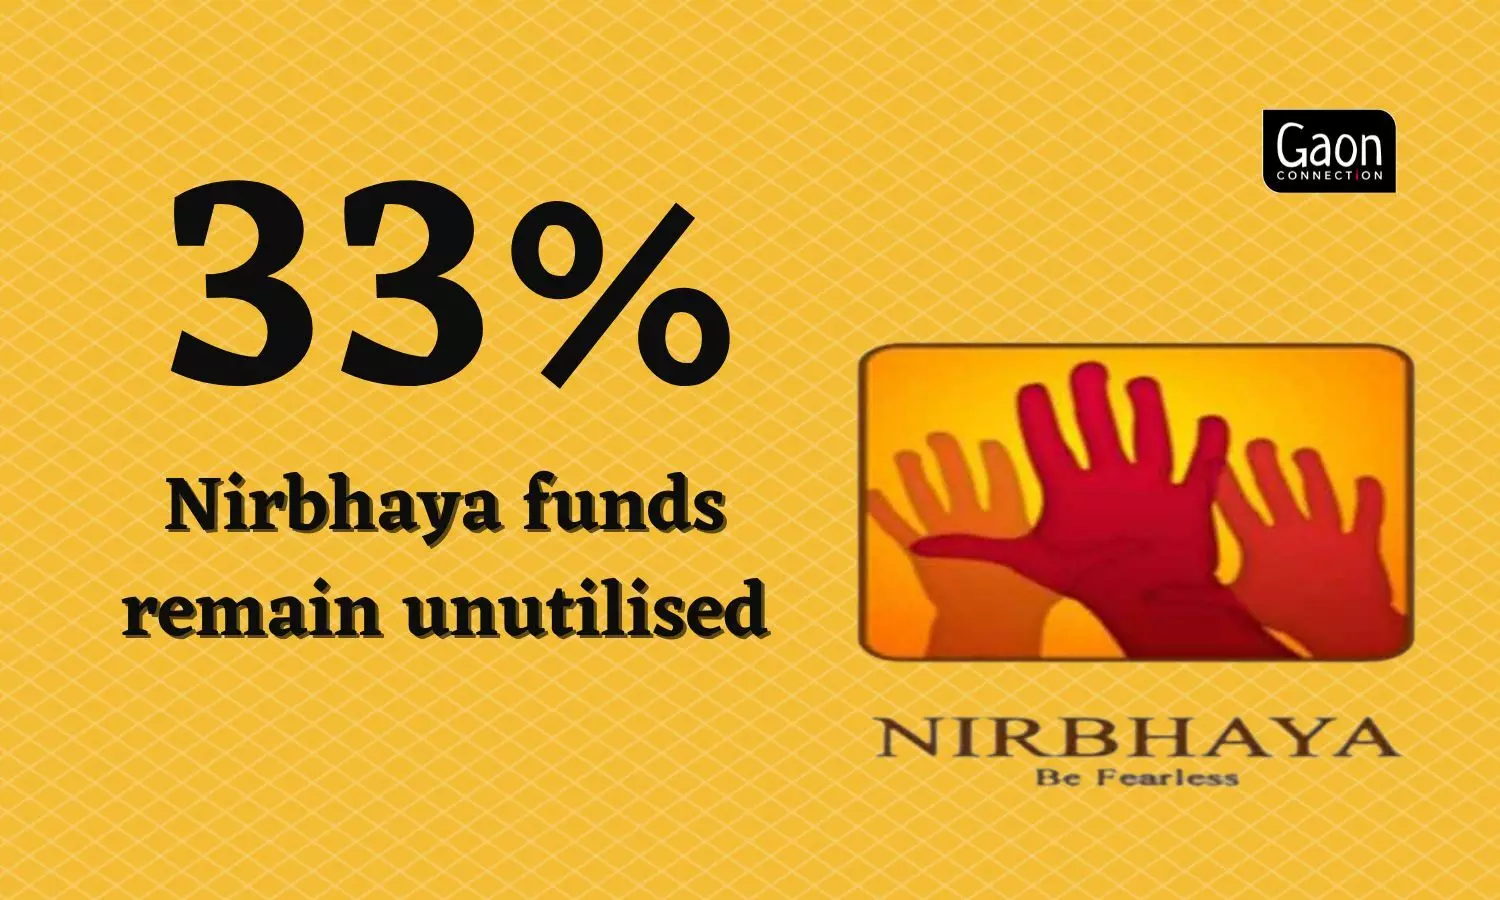 1/3rd of Nirbhaya fund remains unspent despite increase in rape cases in India